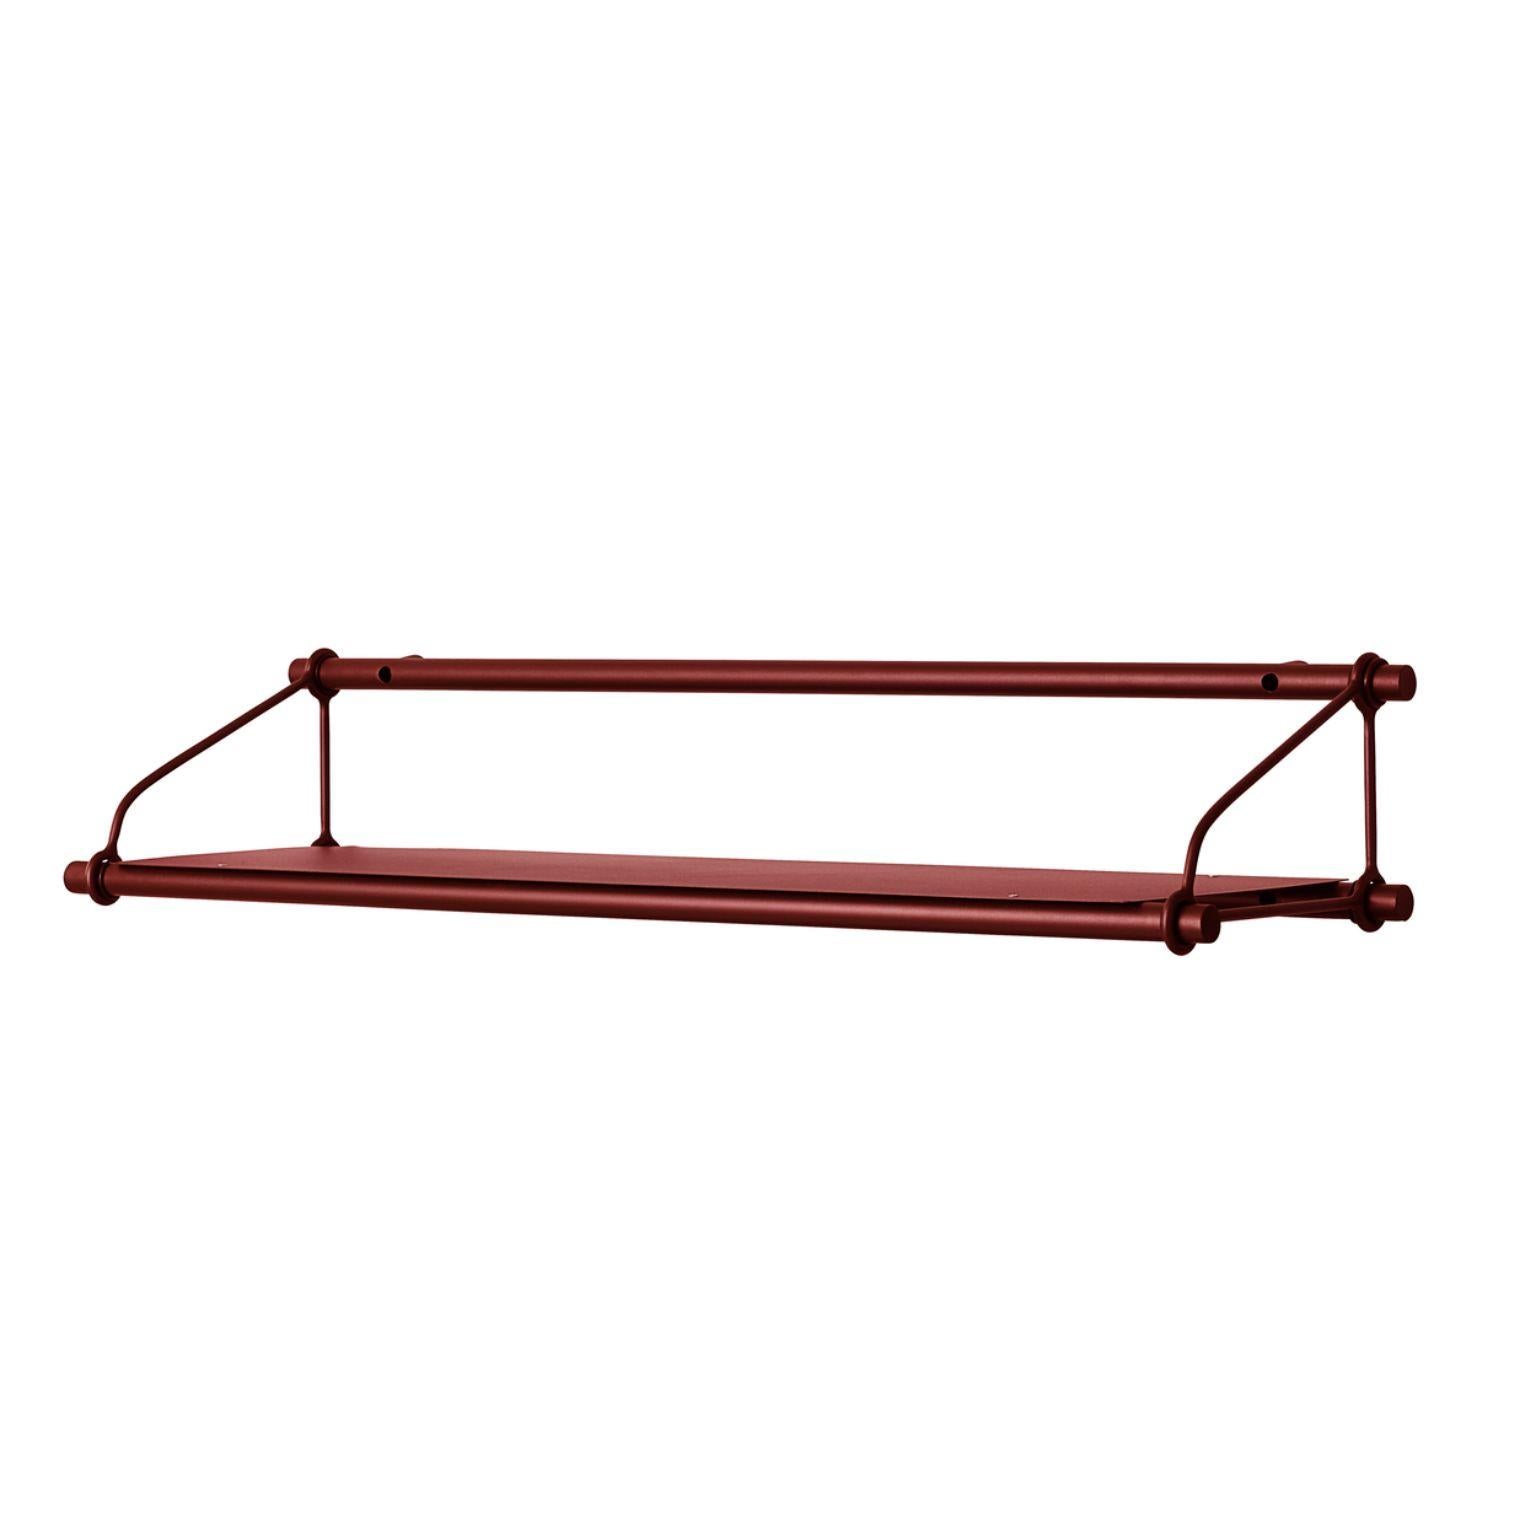 Parade 1 shelf Top Oxide Red by Warm Nordic
Dimensions: D100 x W30 x H19cm
Material: Powder coated steel
Weight: 4 kg
Also available in different colors and dimensions. 

Elegant metal shelving unit with plenty of space for all your favourite